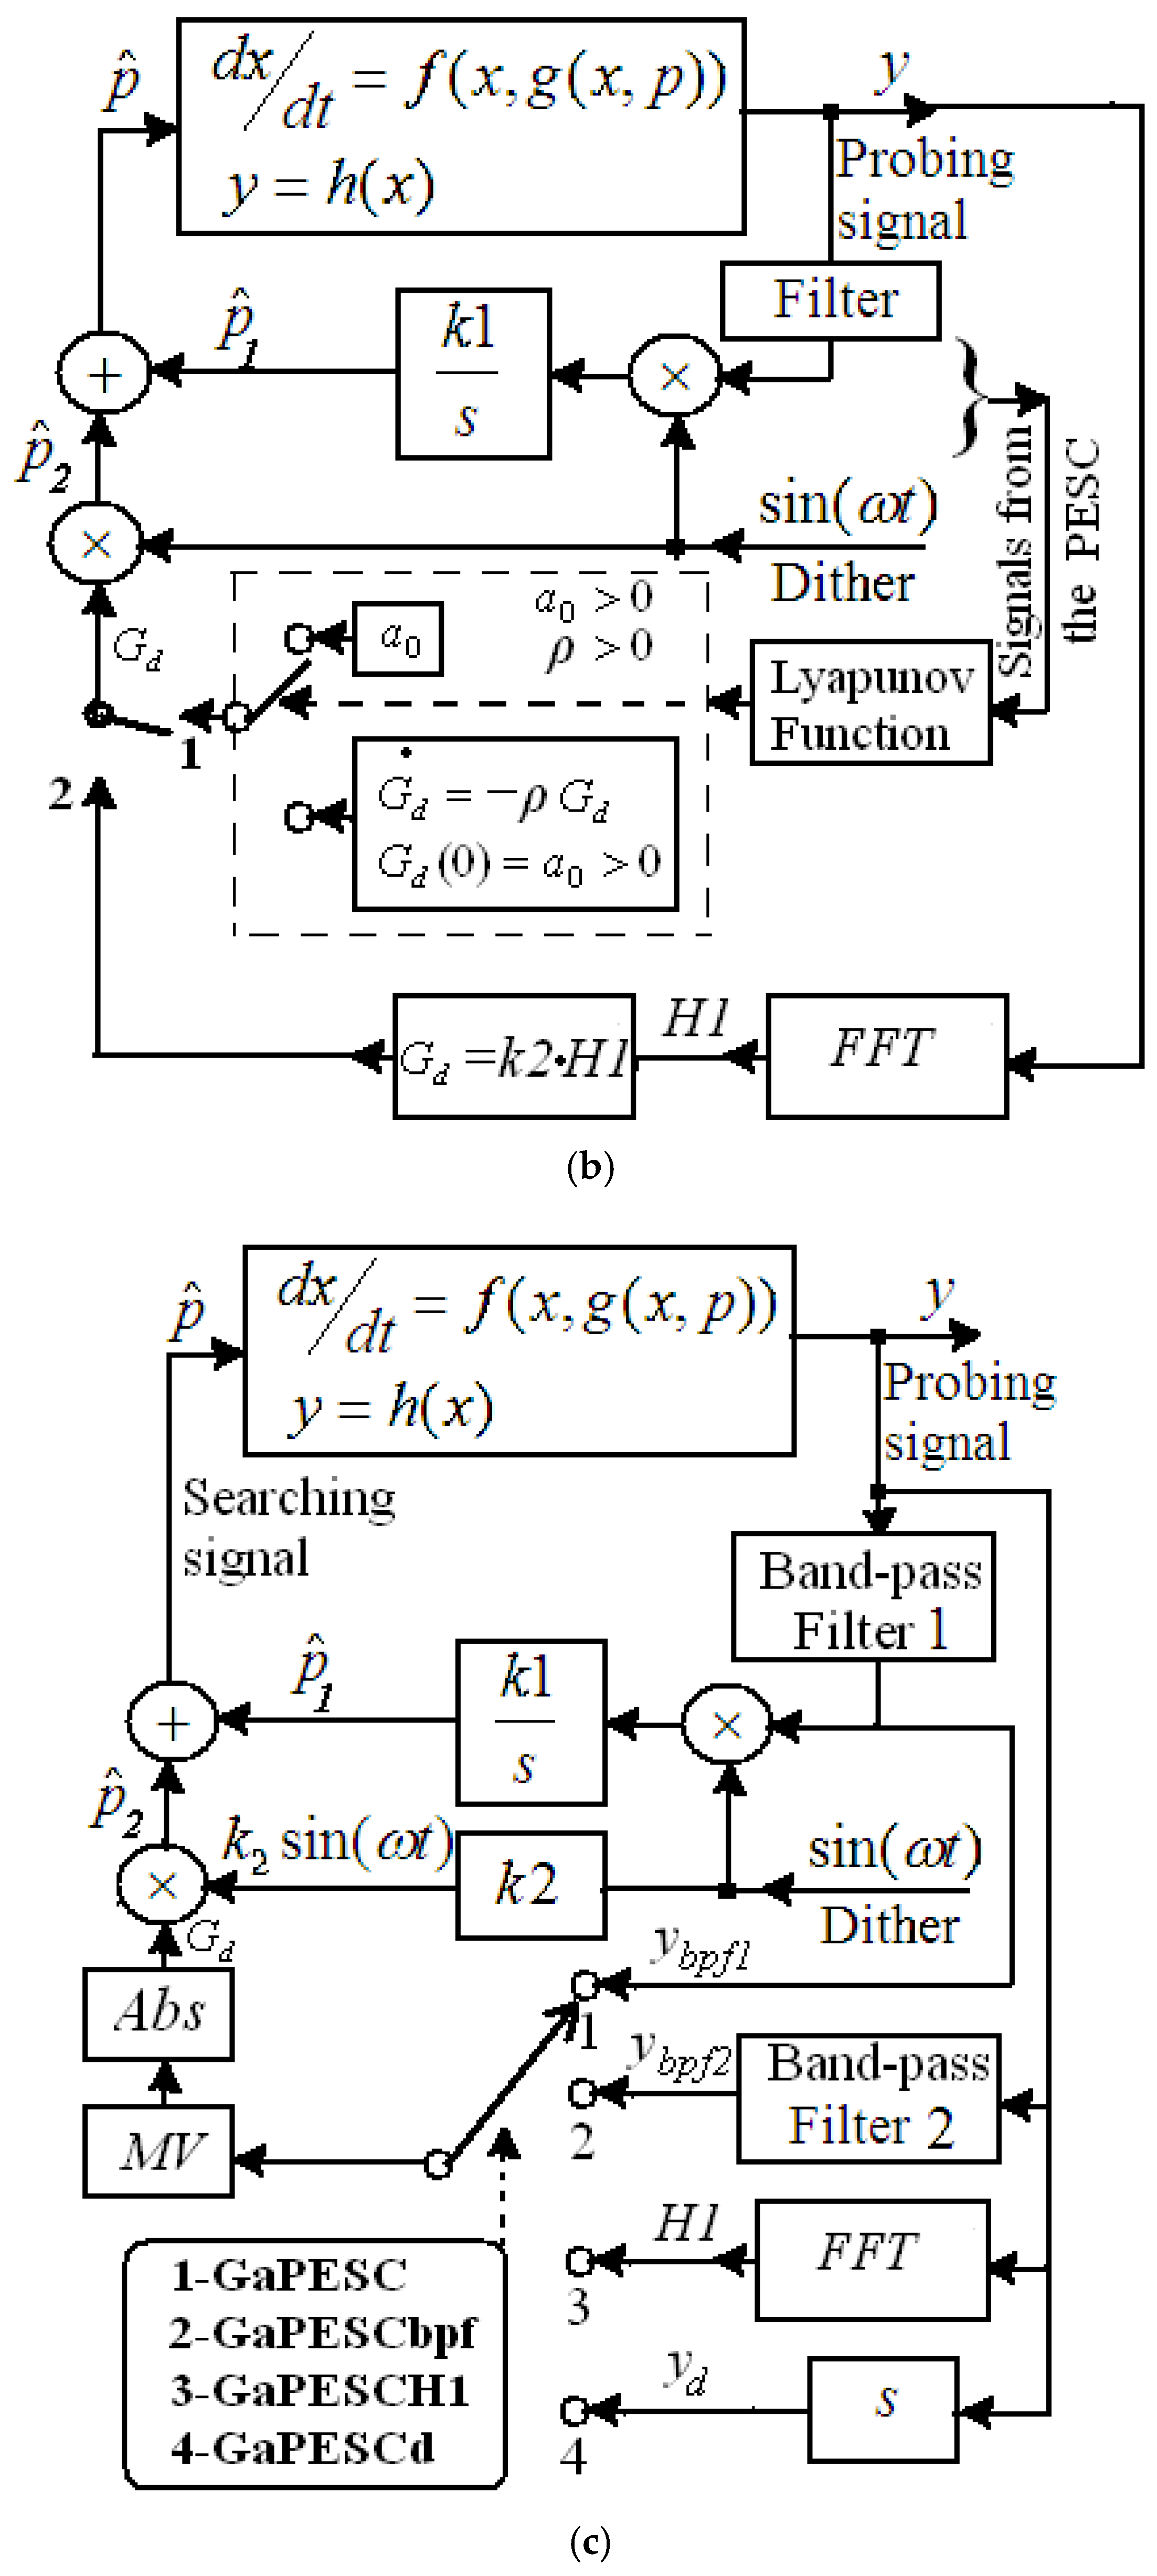 Energies Free Full Text Experimental Comparison Of Three Real Time Optimization Strategies Applied To Renewable Fc Based Hybrid Power Systems Based On Load Following Control Html